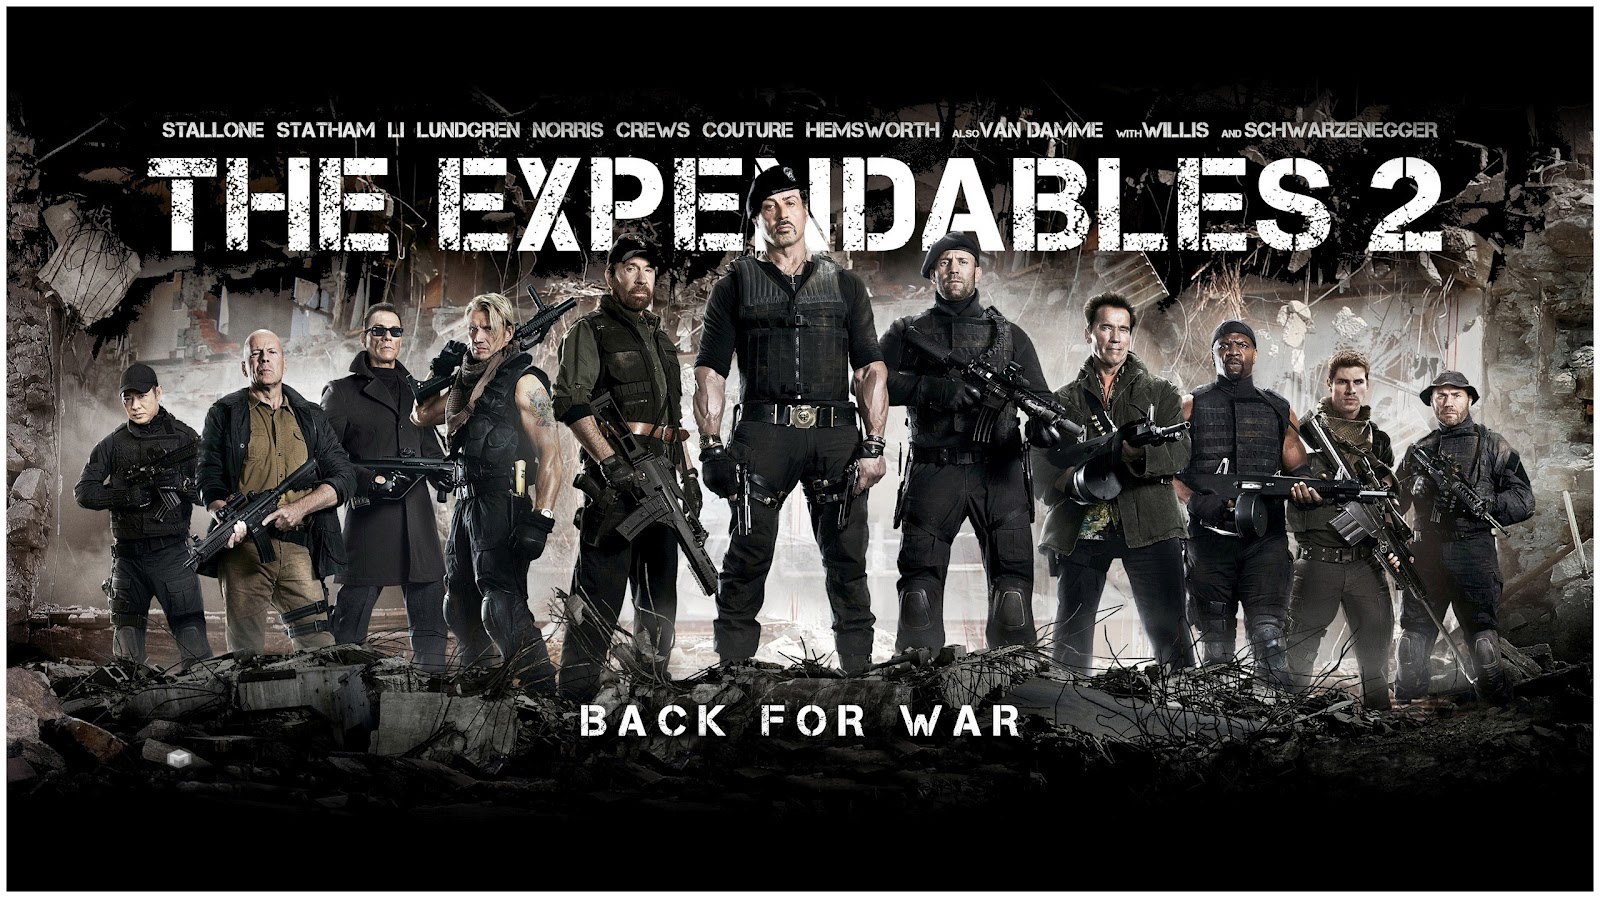 Whoa, This Is Heavy!: Review: The Expendables 2 [2012]